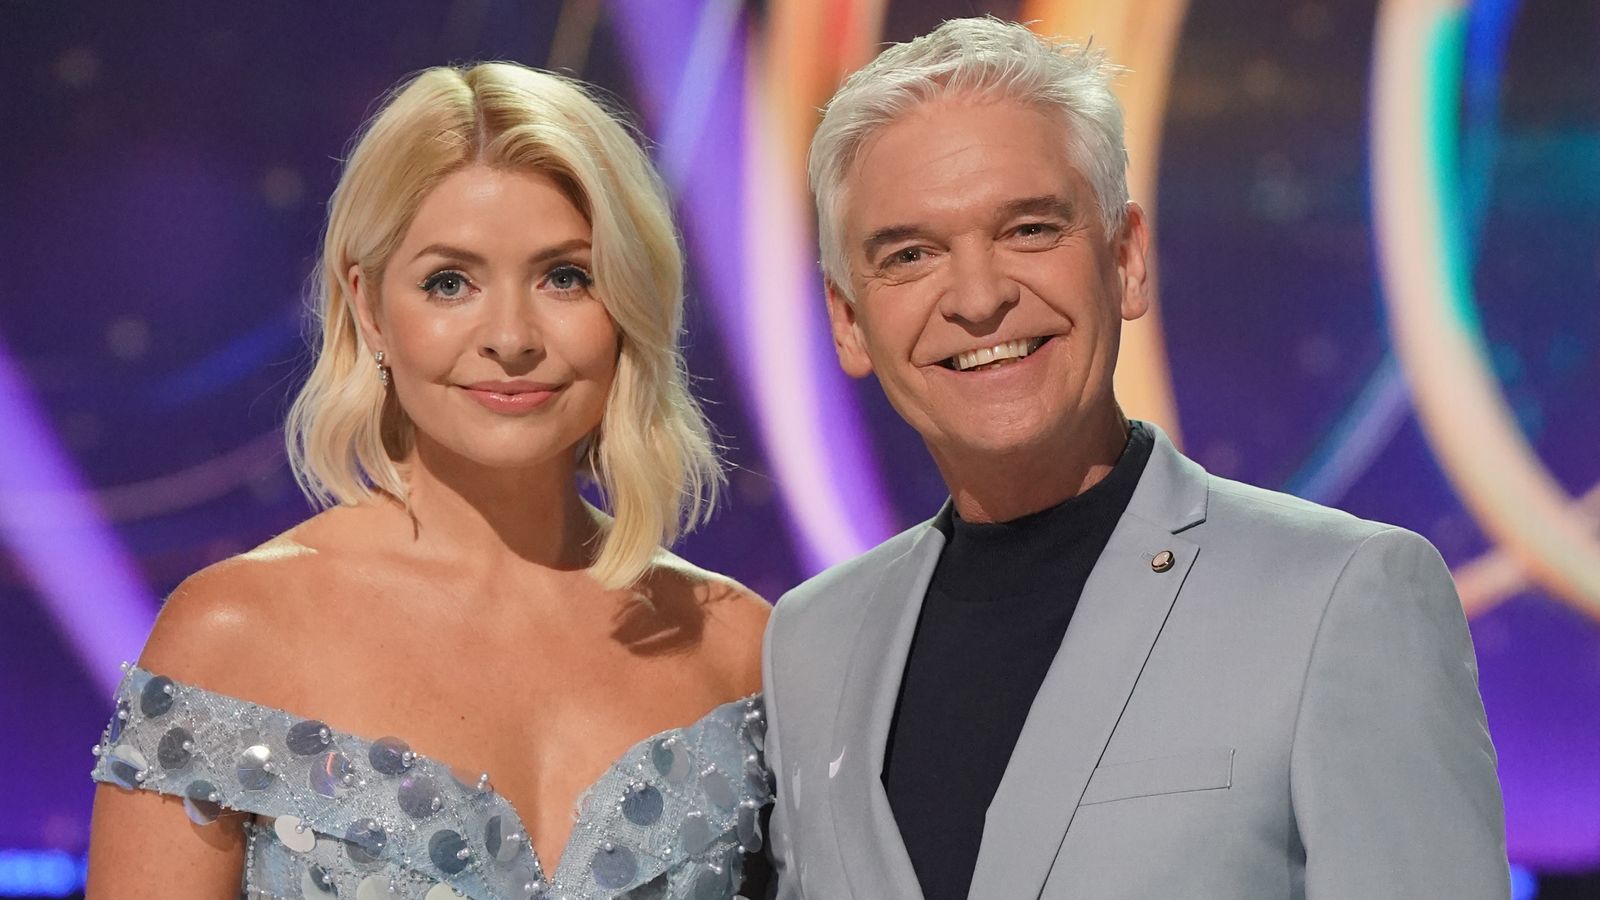 Phillip Schofield: Timeline of ITV departure after colleague affair and Holly Willoughby 'rift'